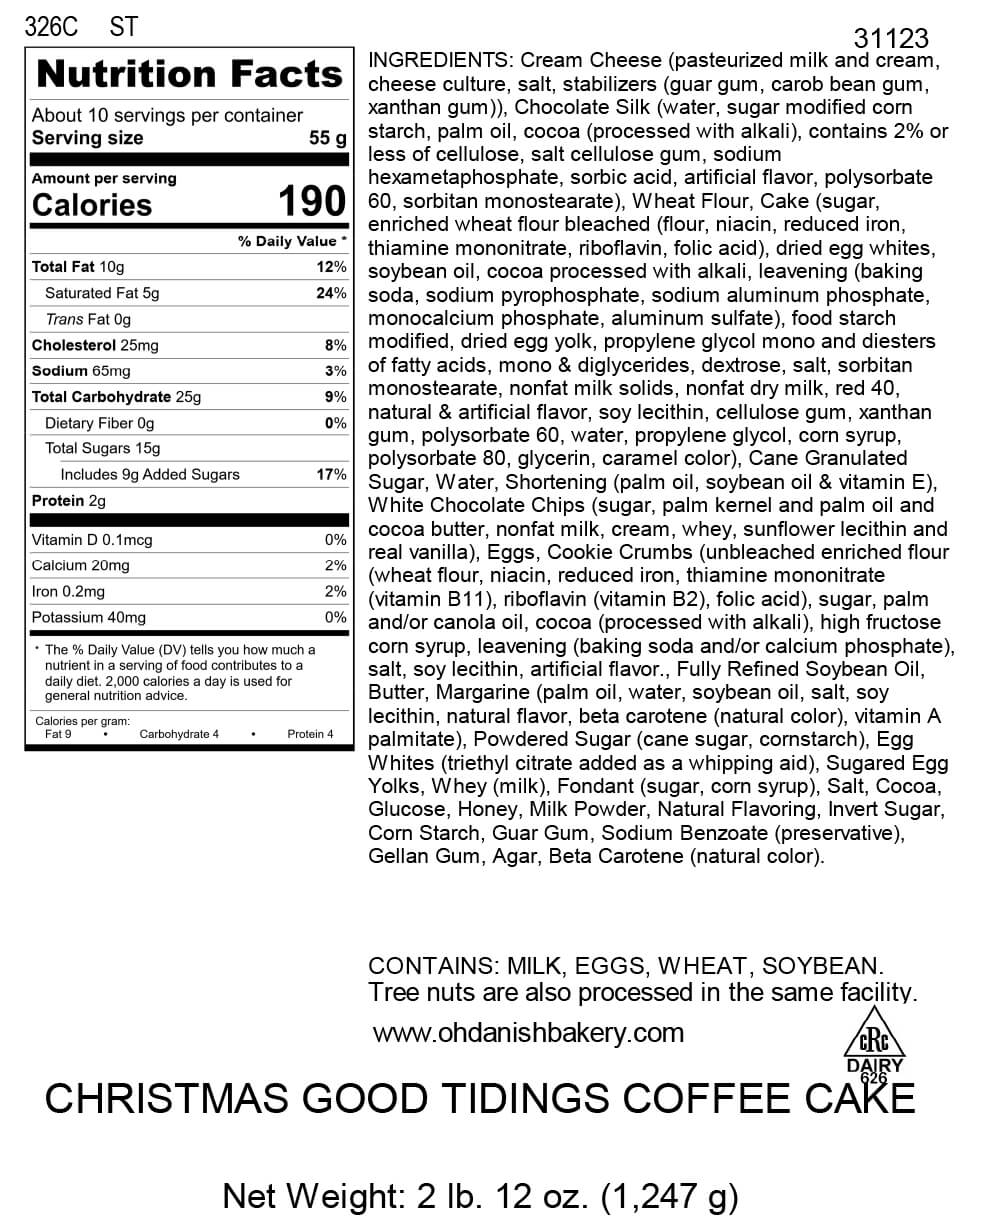 Nutritional Label for Christmas Good Tidings Coffee Cake